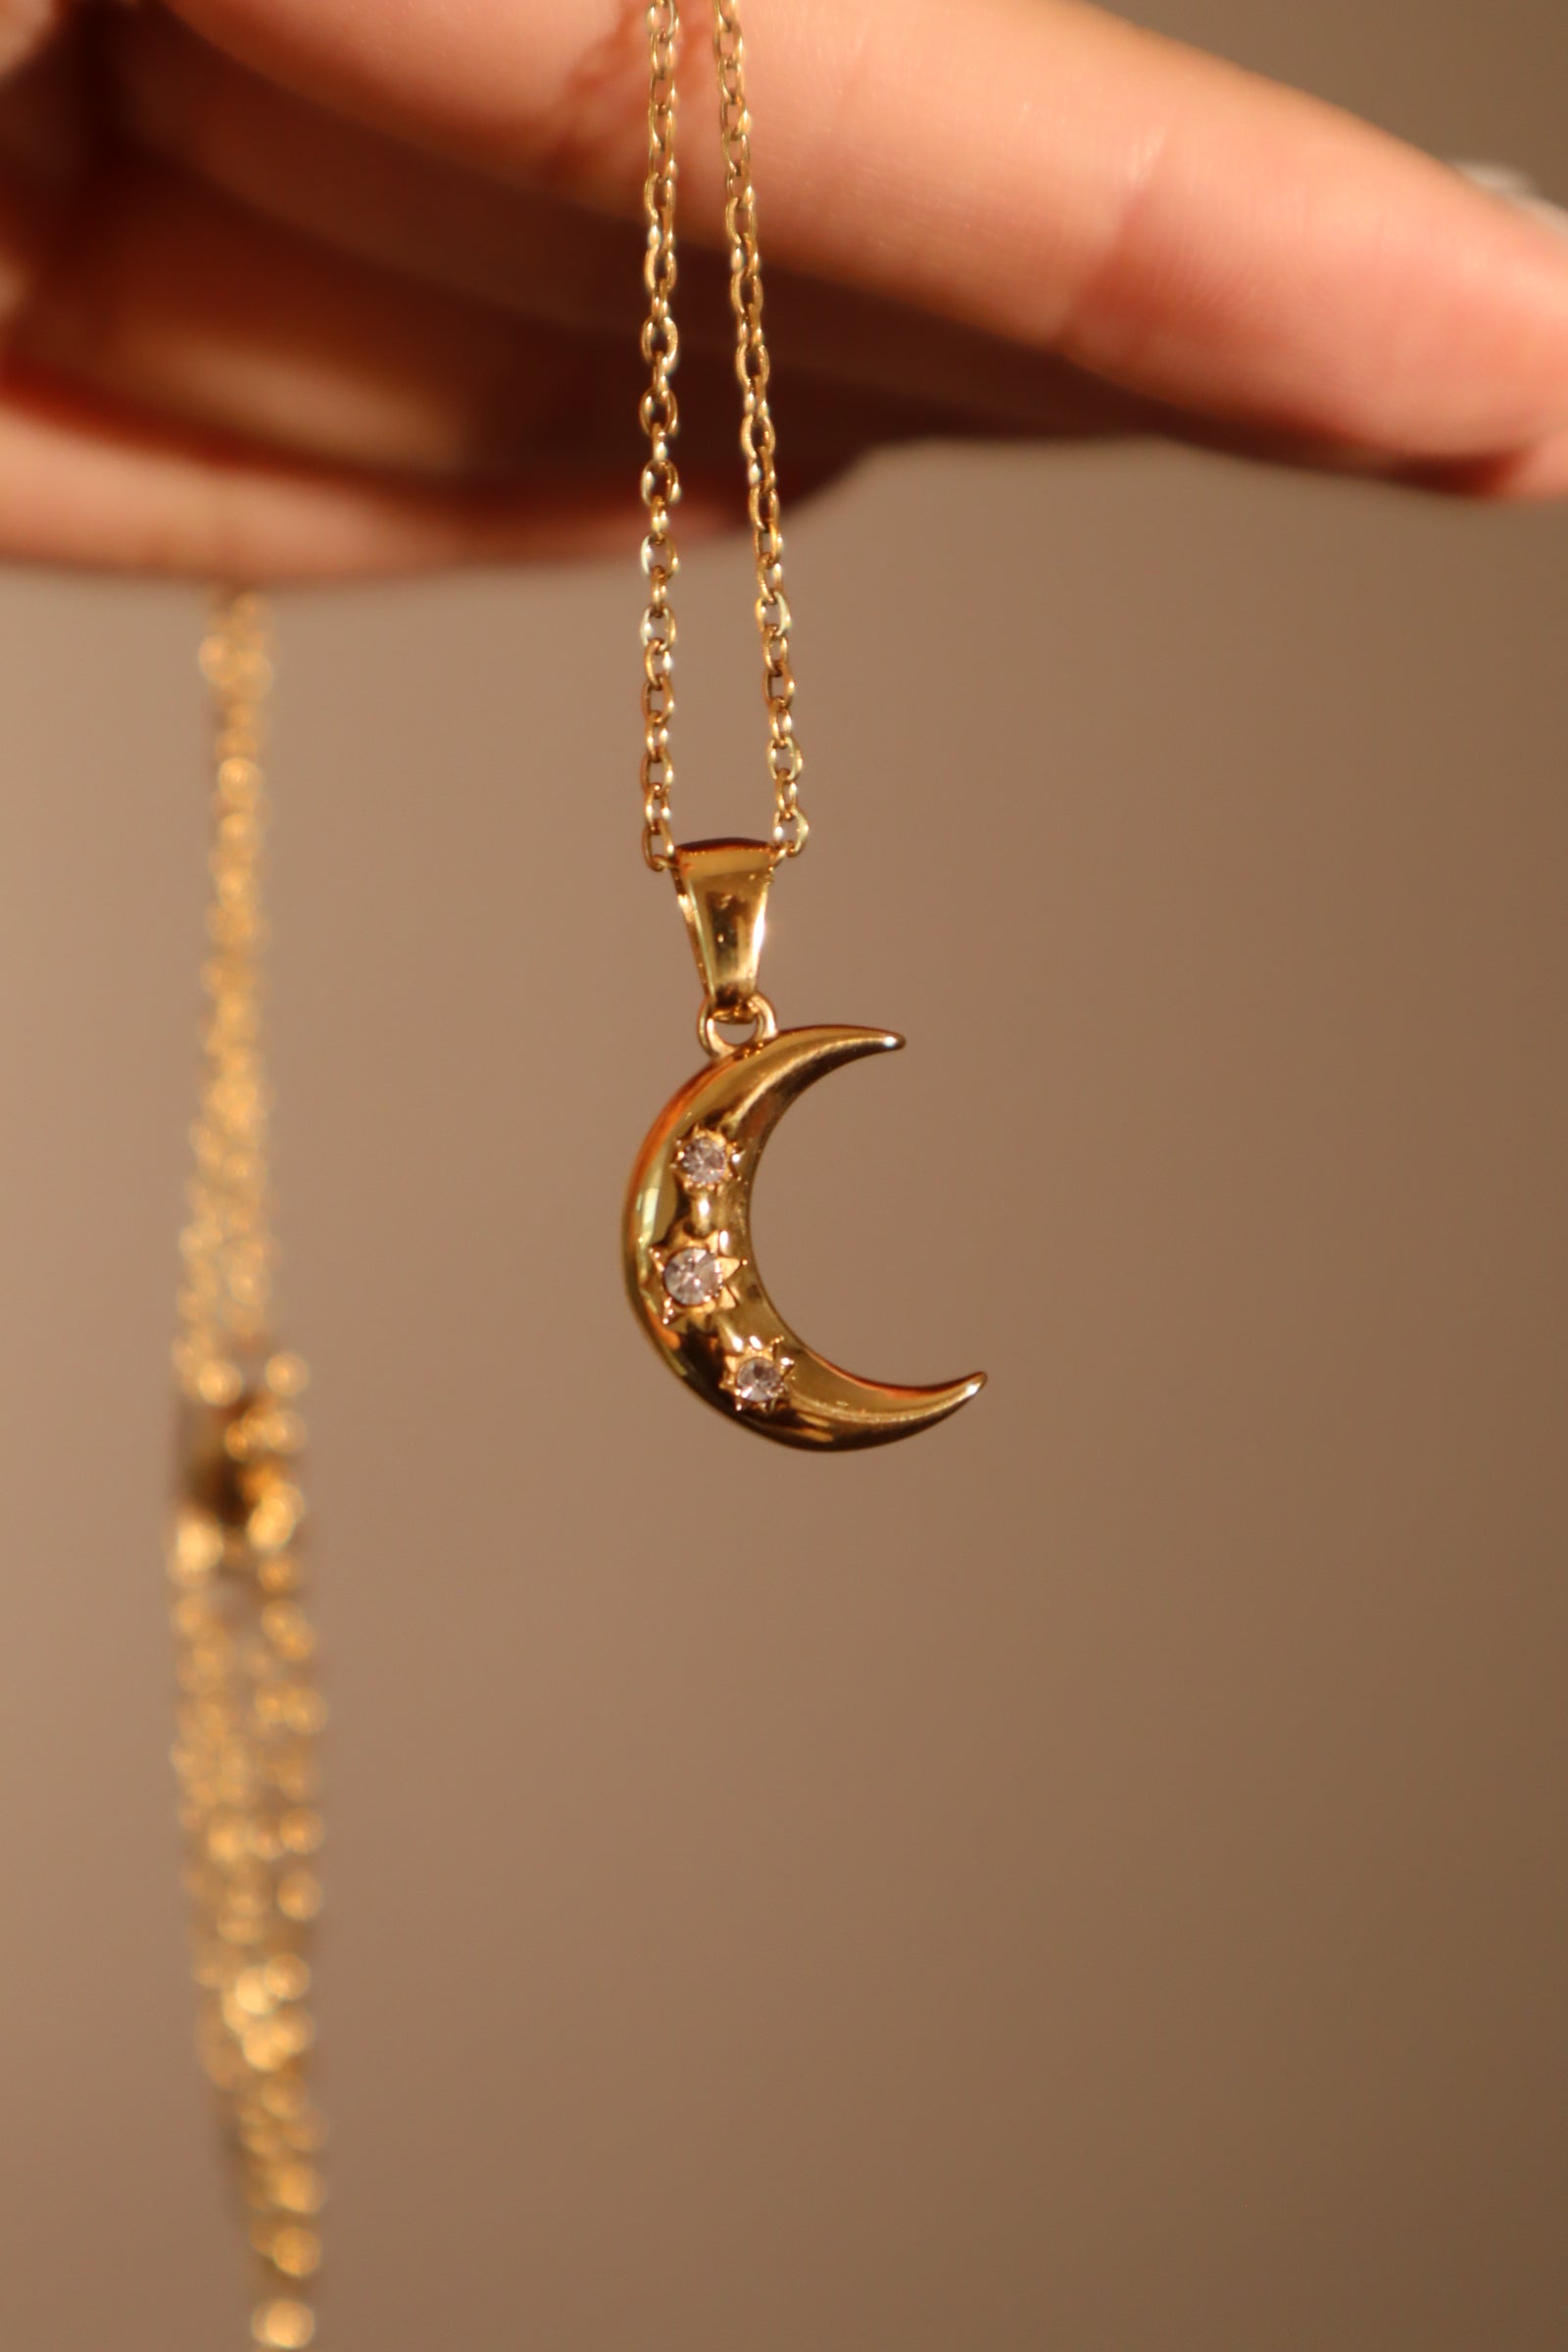 Diamond Moon and Star Necklace, White Gold Crescent Moon Pendant, Gold Diamond  Moon Jewelry, Diamond Star Necklace, Cable Chain Lobster - Etsy